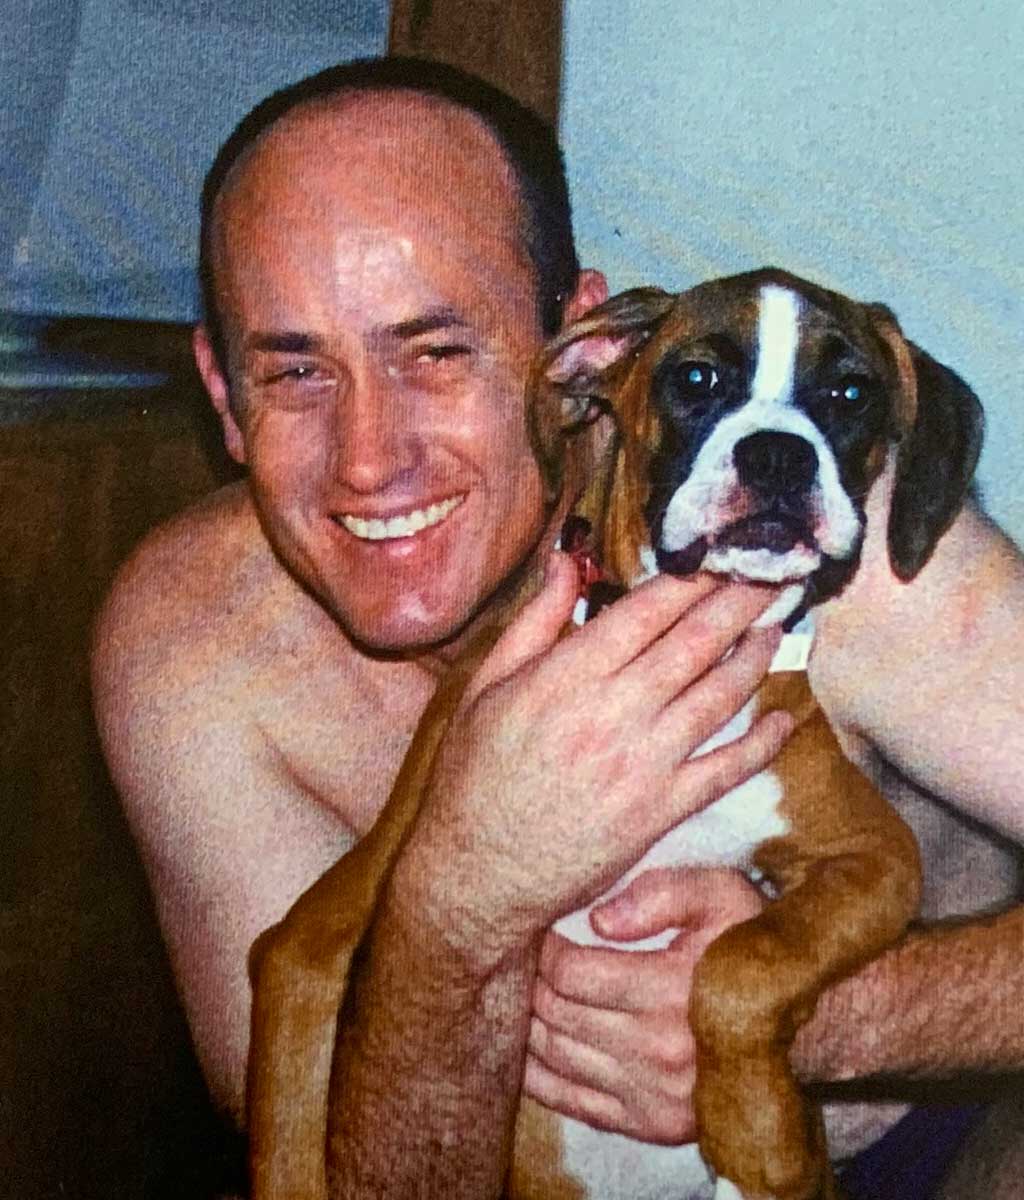 Front view of a shirtless man crouching and holding a boxer puppy in his arms. The man is smiling broadly. - click to view larger image